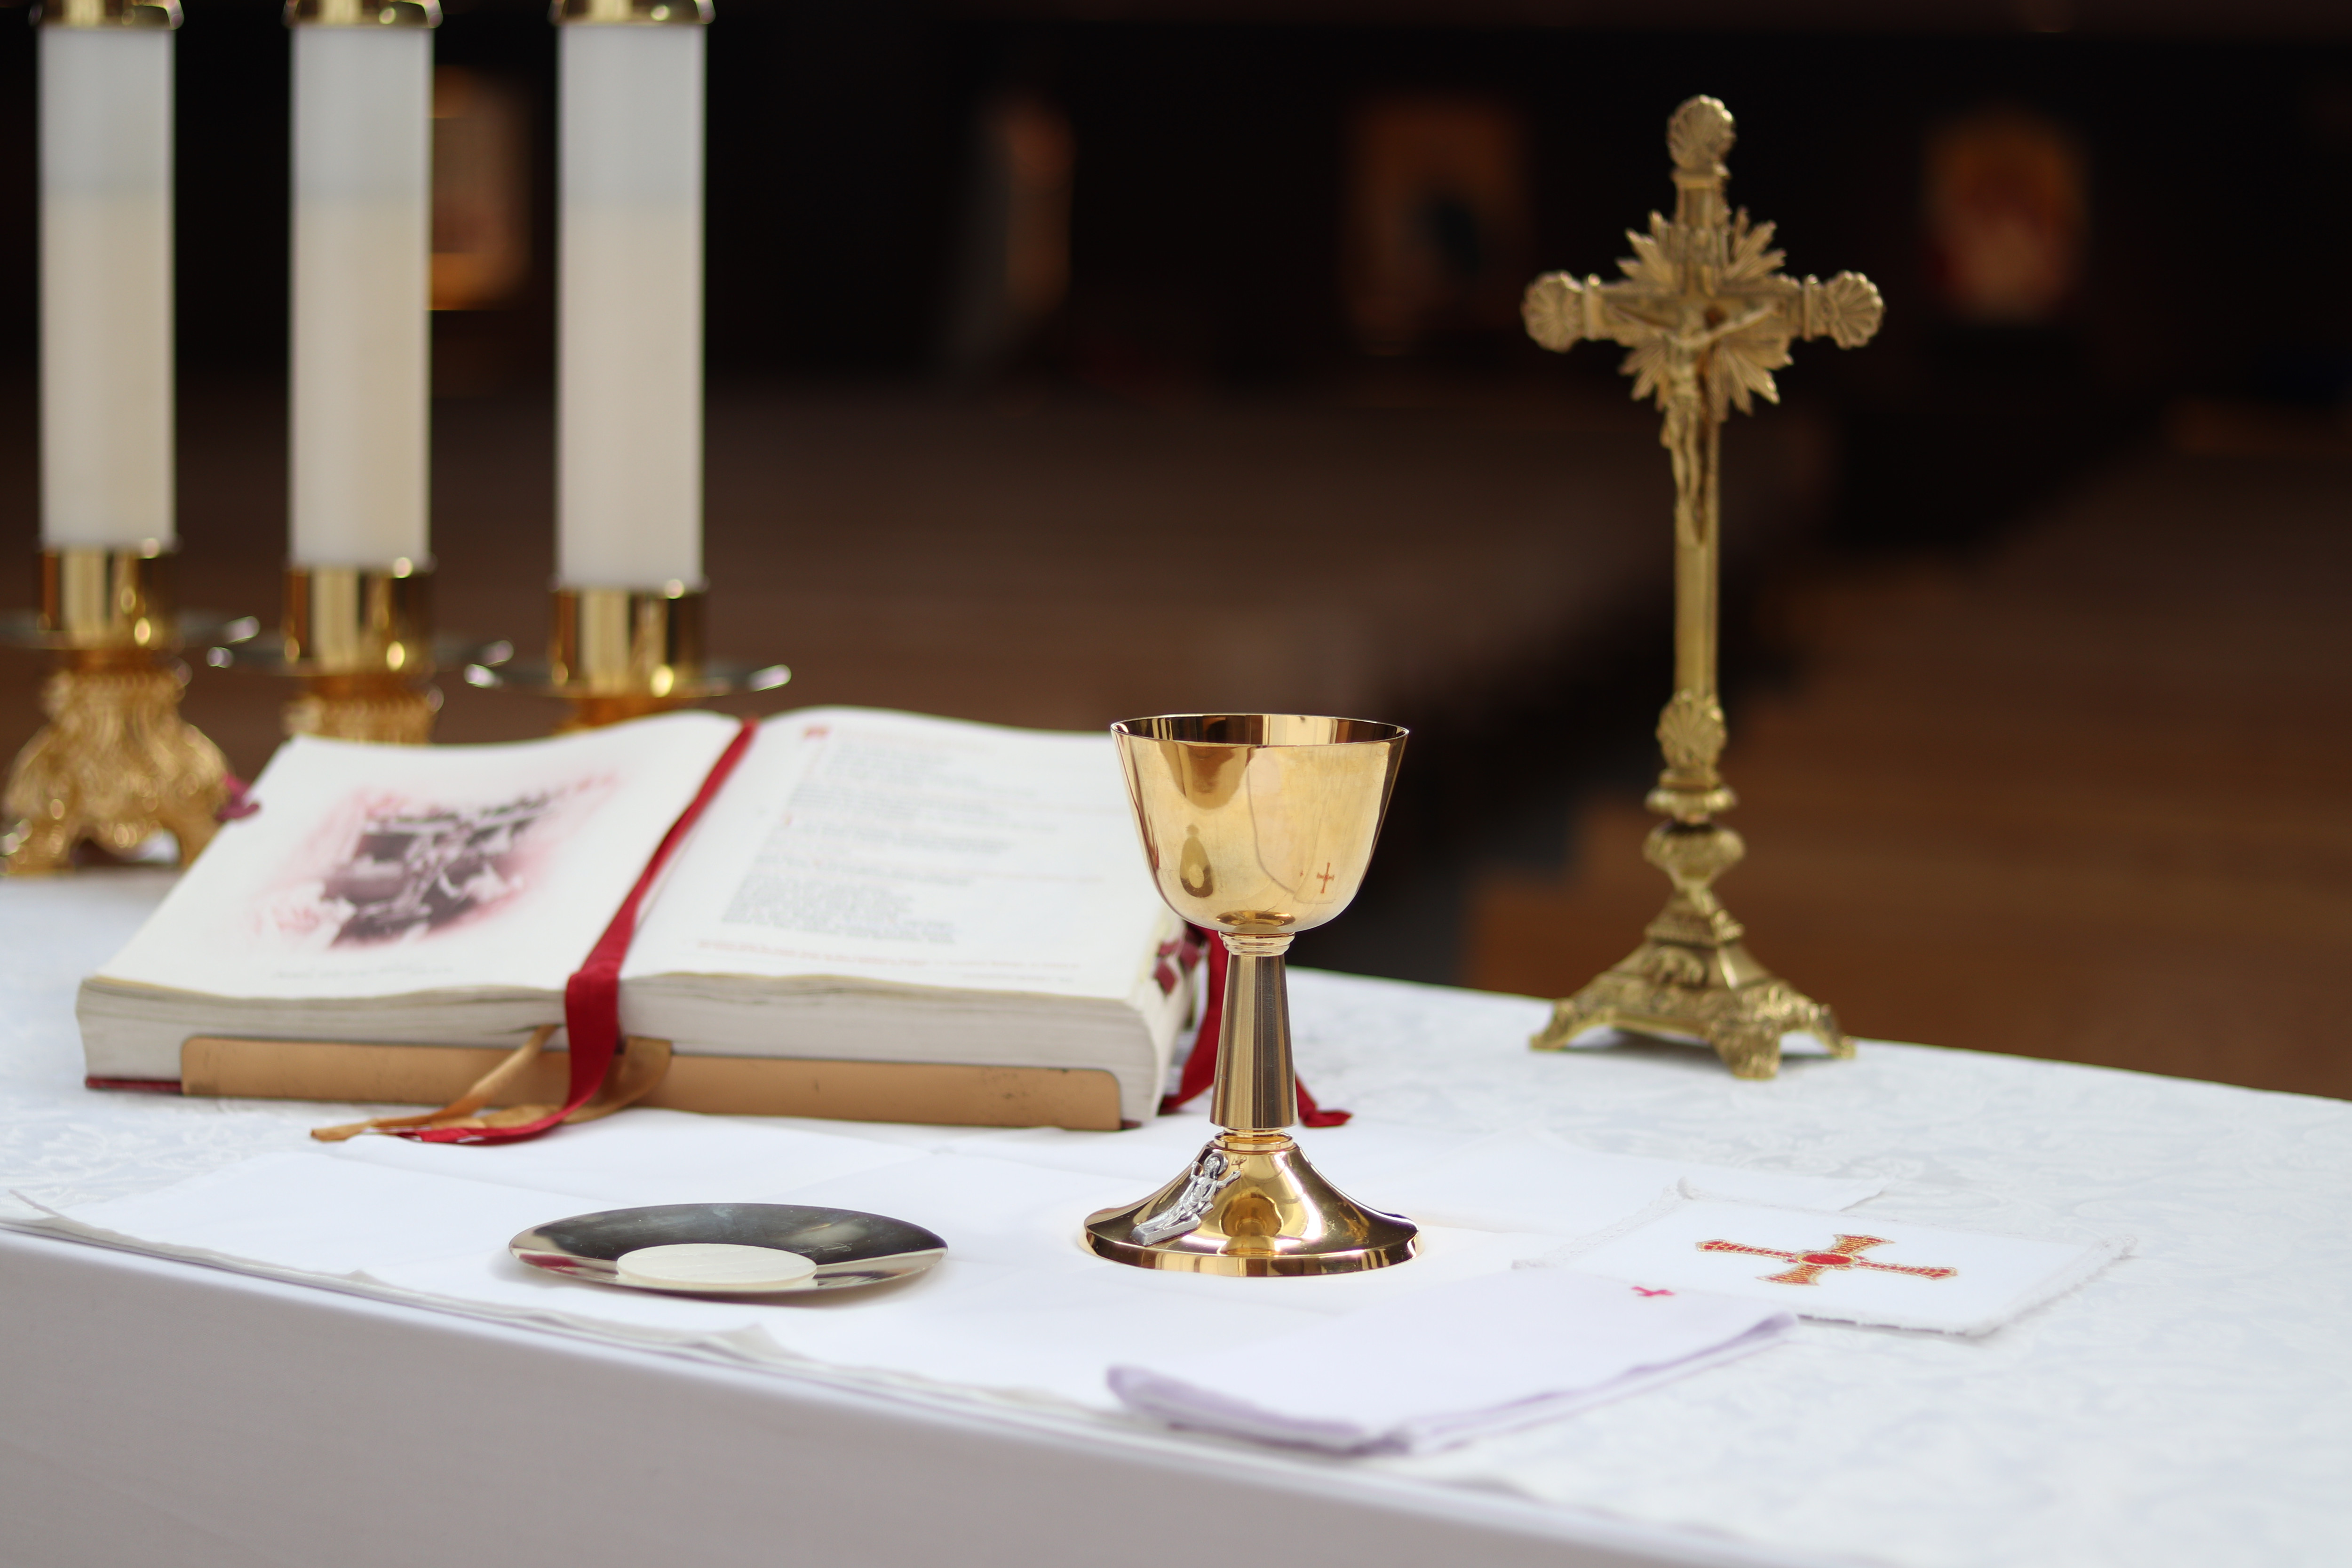 The Sacred Altar at St Timothys with Chalice, Paten, Roman Missal and candles